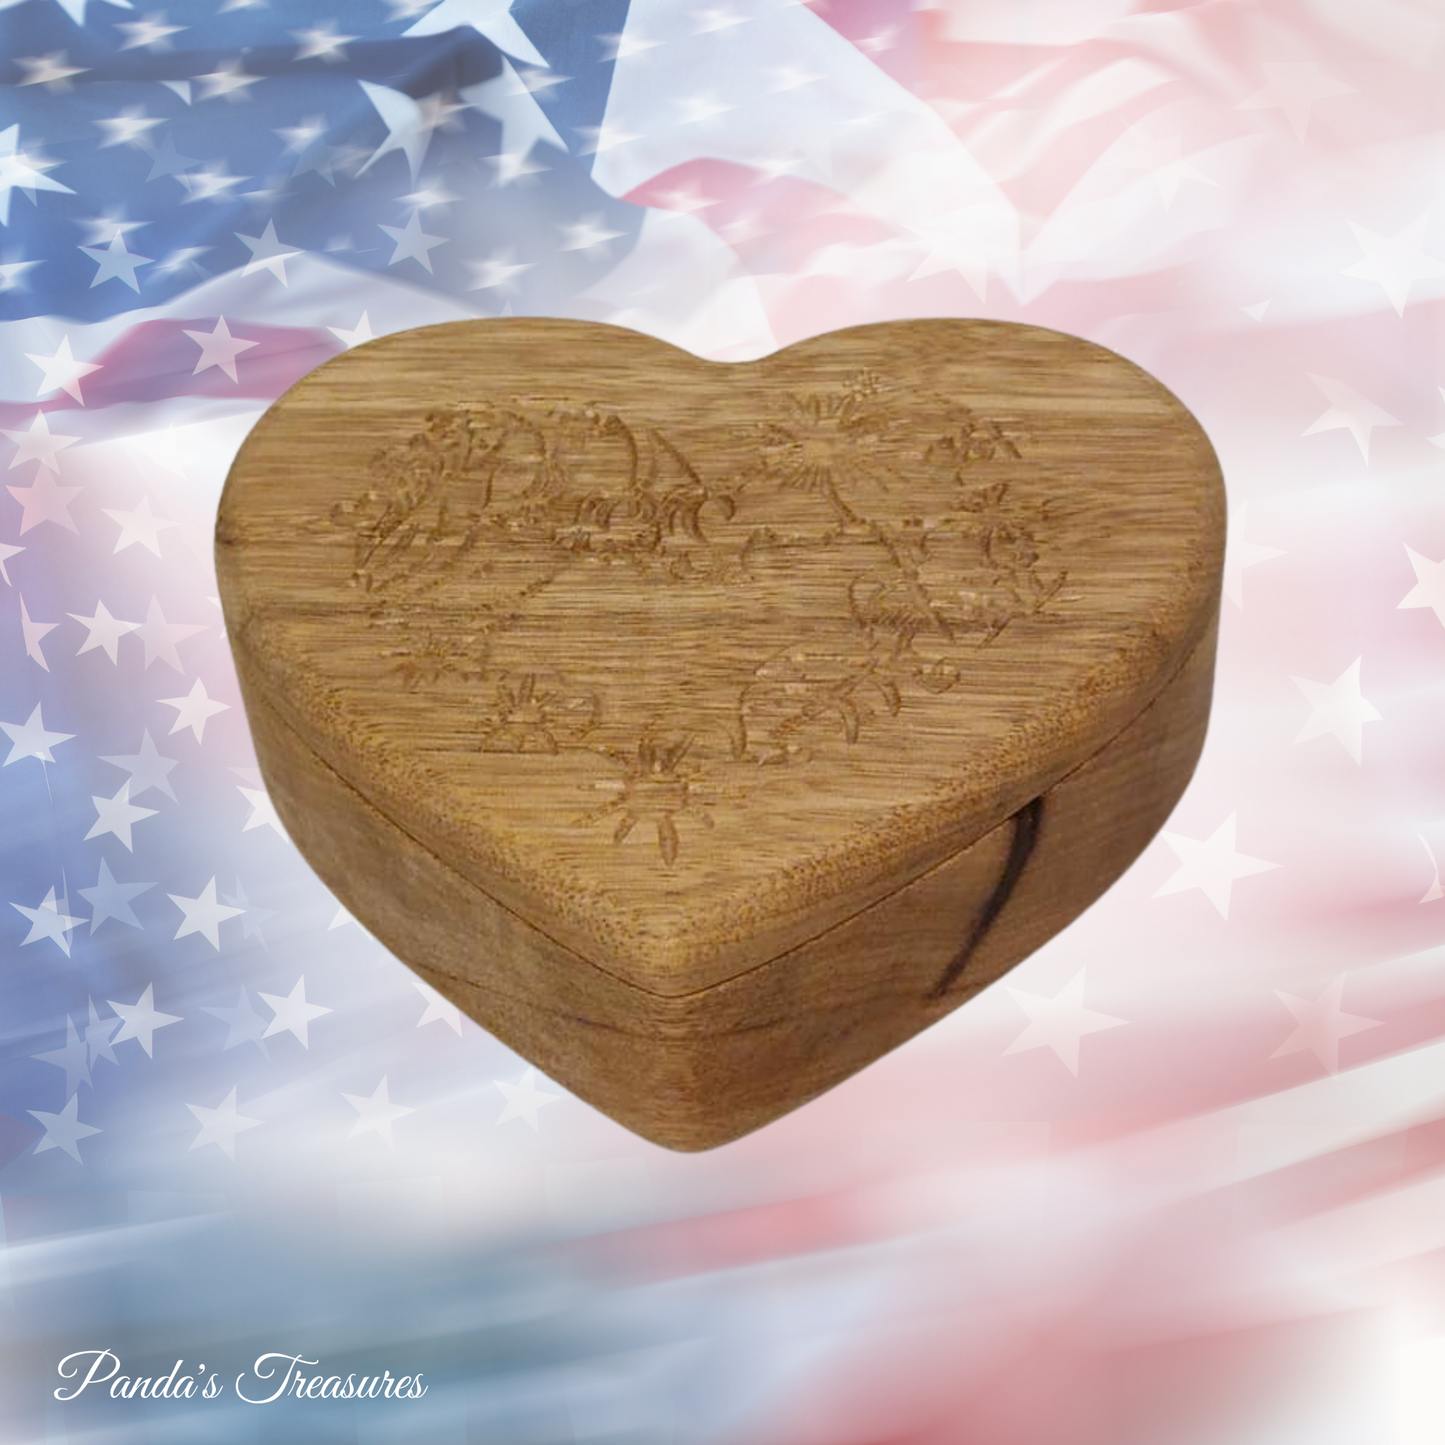 Black Limba Heart Shaped box with flowers carved on lid